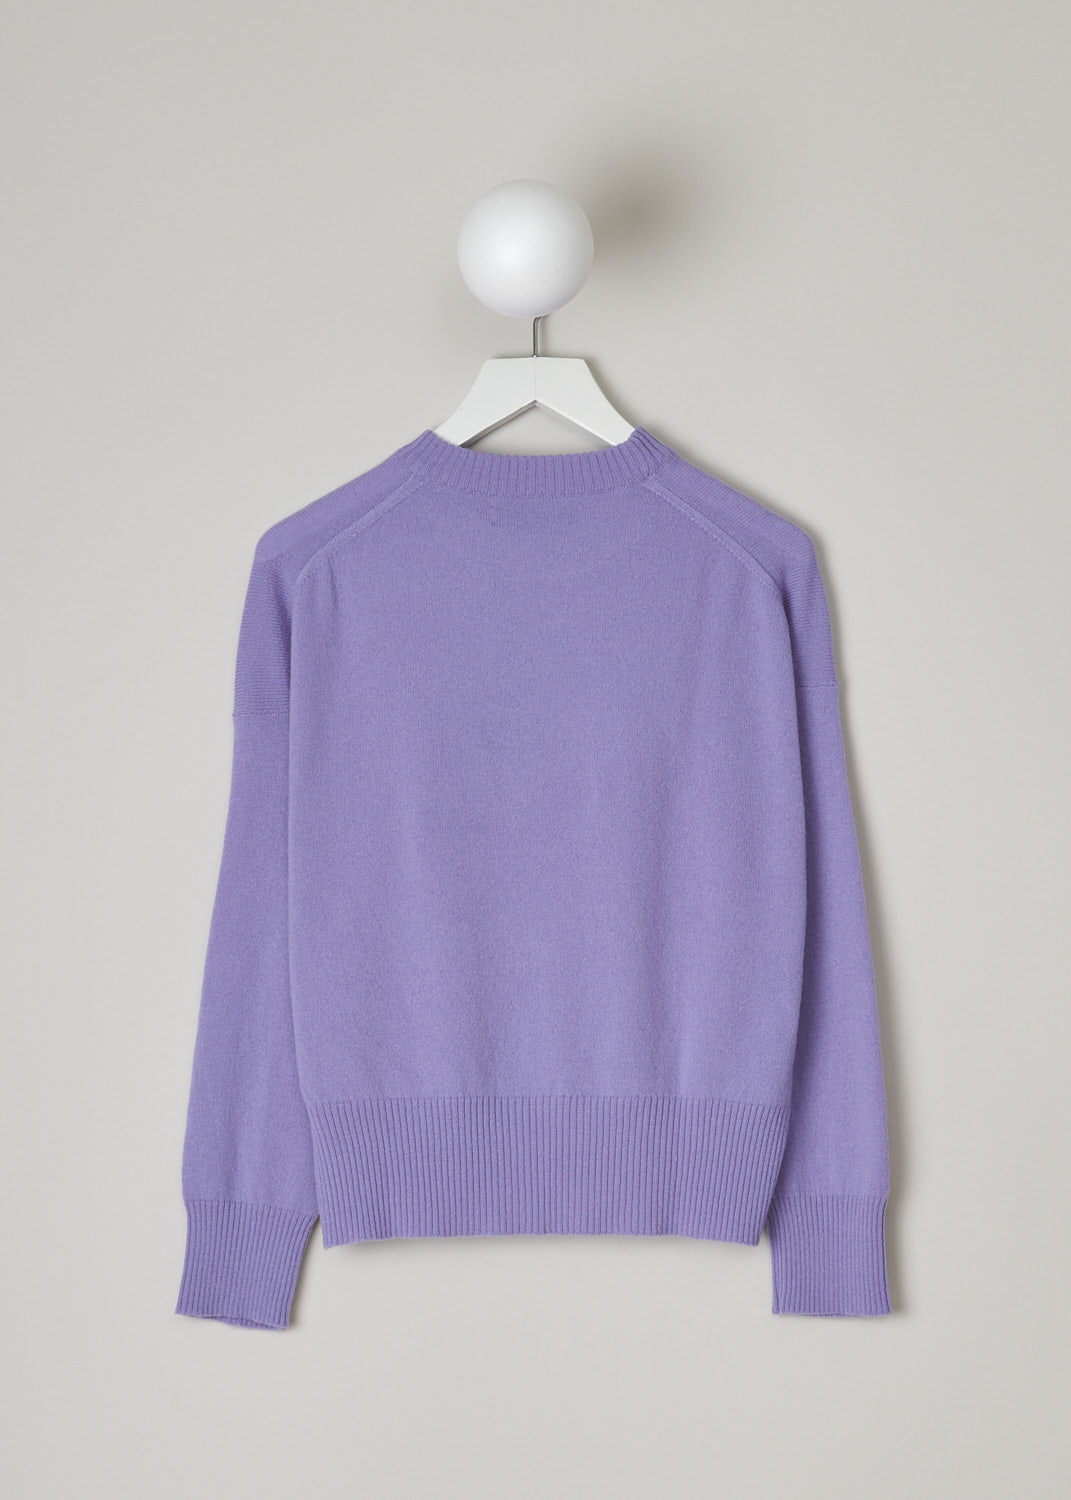 PRINGLE OF SCOTLAND, LAVENDER CASHMERE SWEATER, PWF819_2624_LAVENDER, Purple, Back, This lavender cashmere sweater had a ribbed round neckline. The cuffs and hemline have that same ribbed finish.  
